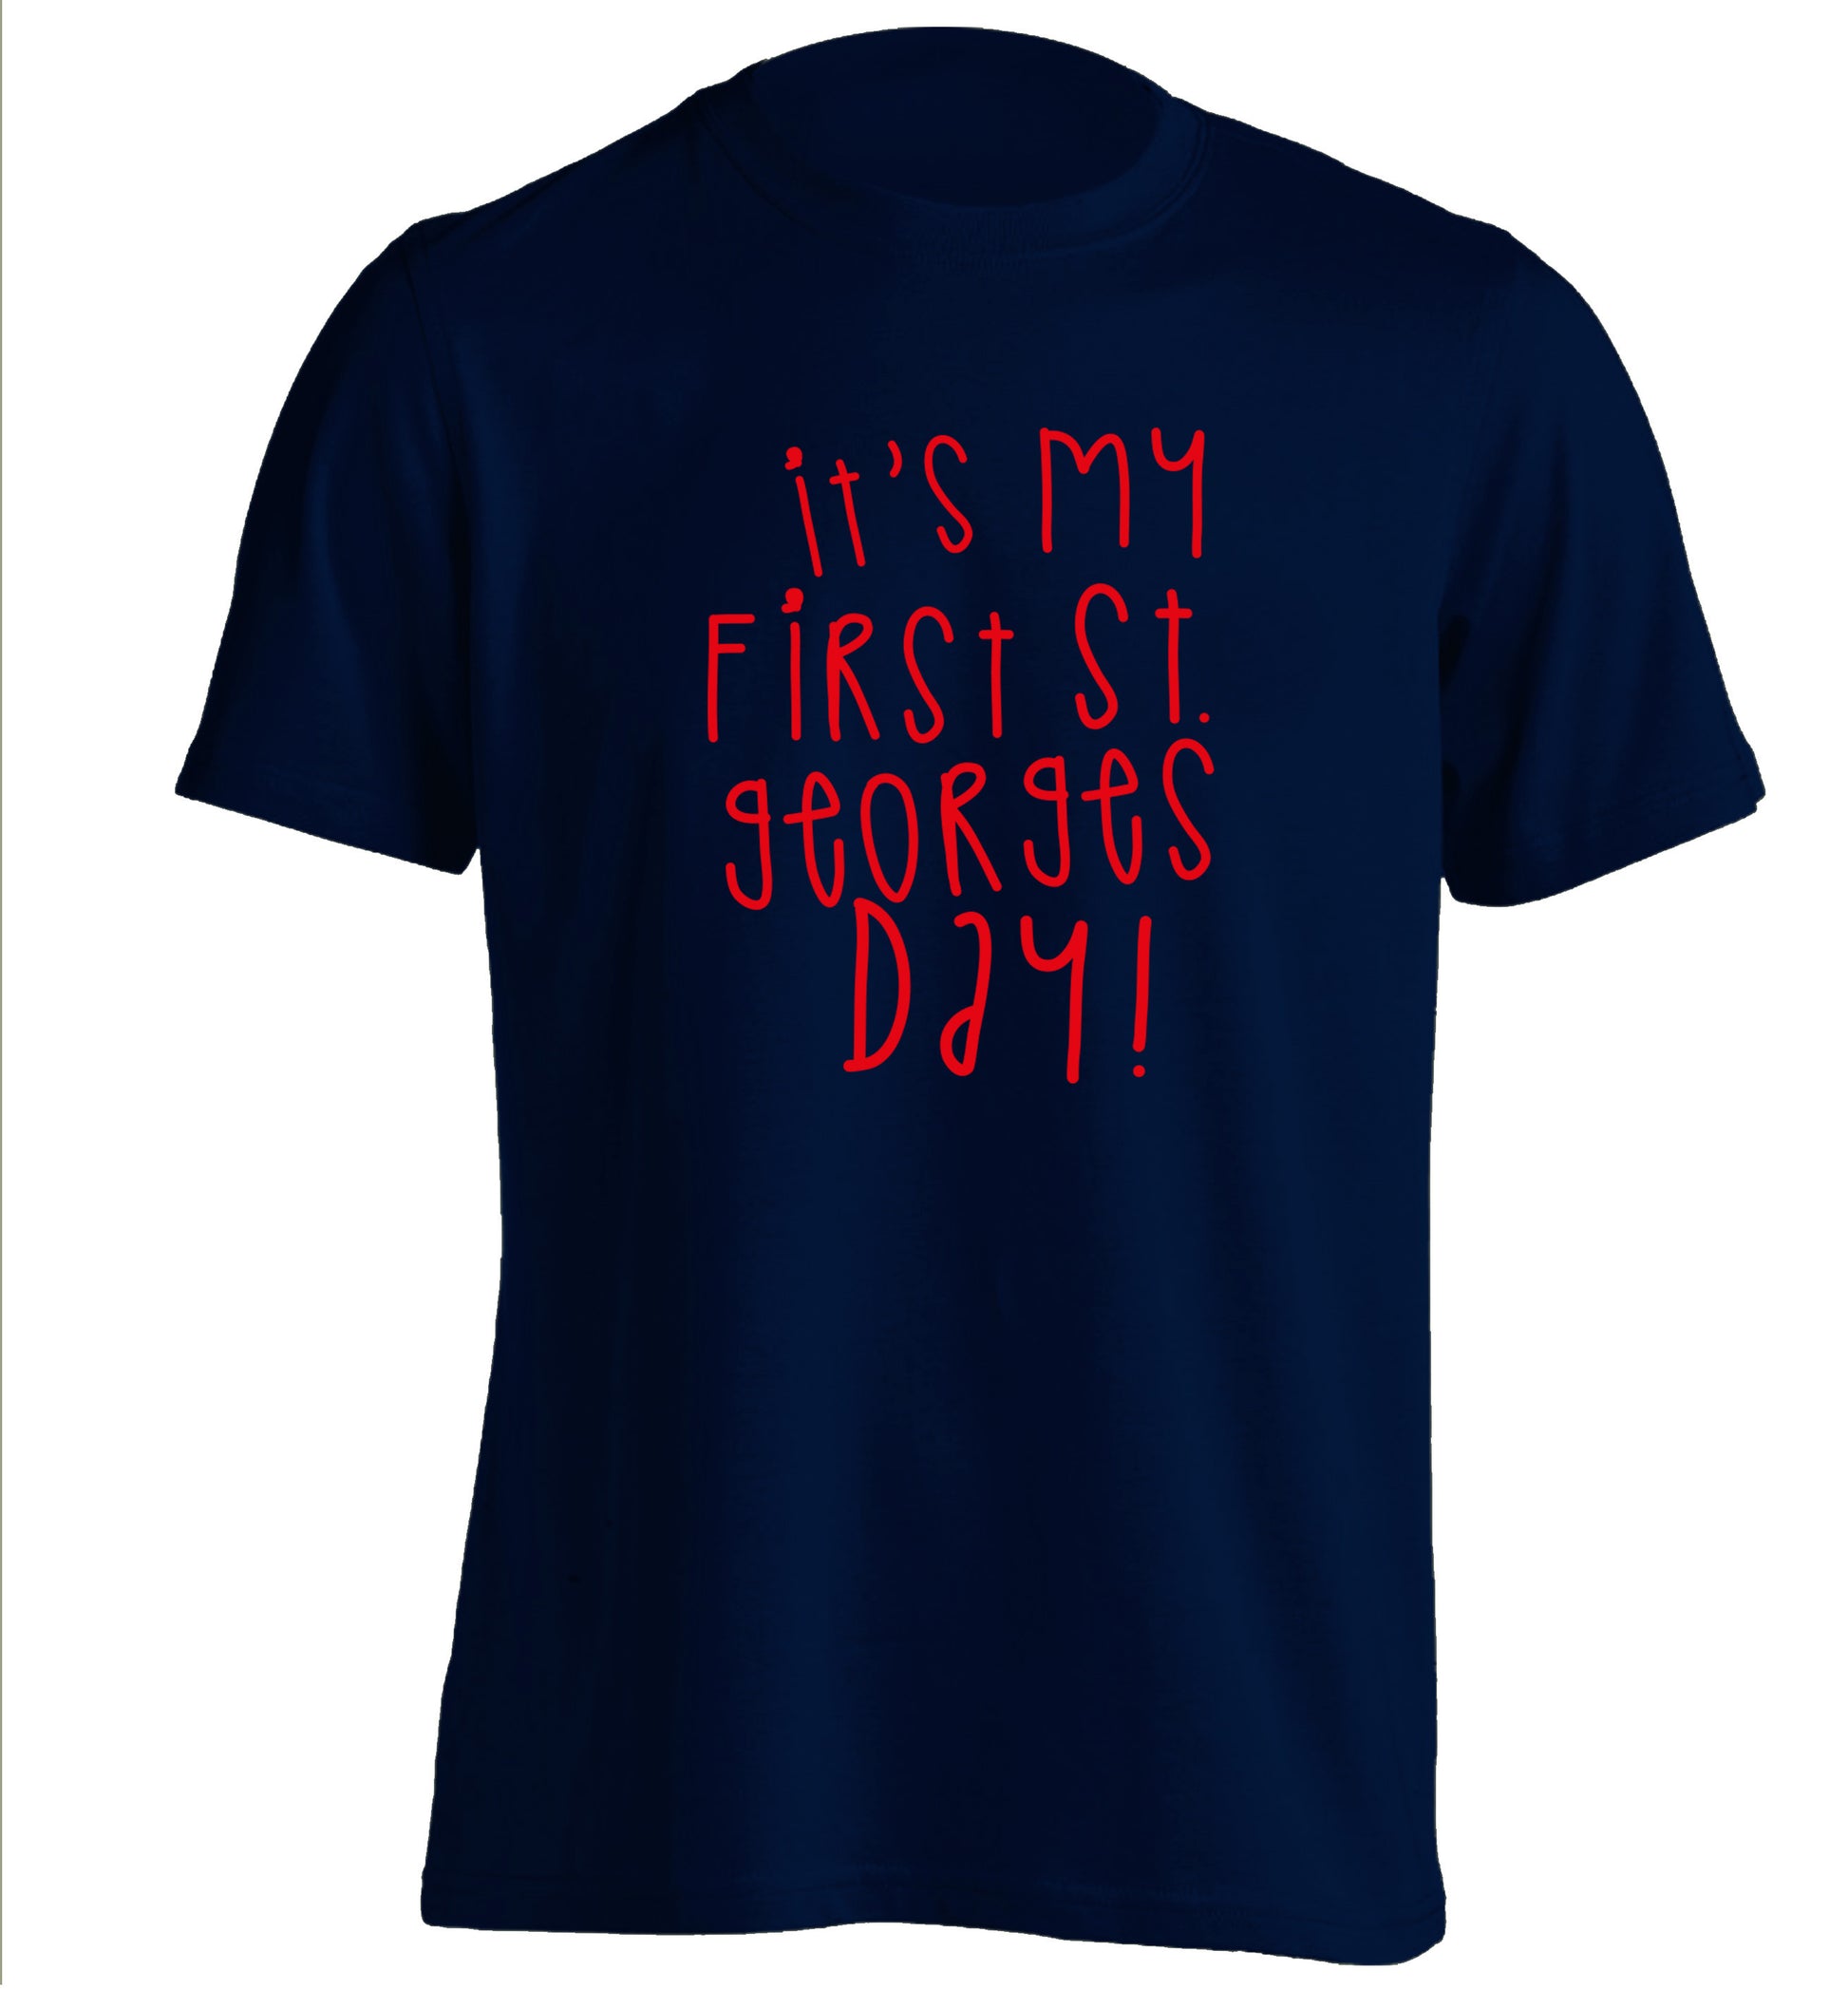 It's my first St Georges day adults unisex navy Tshirt 2XL